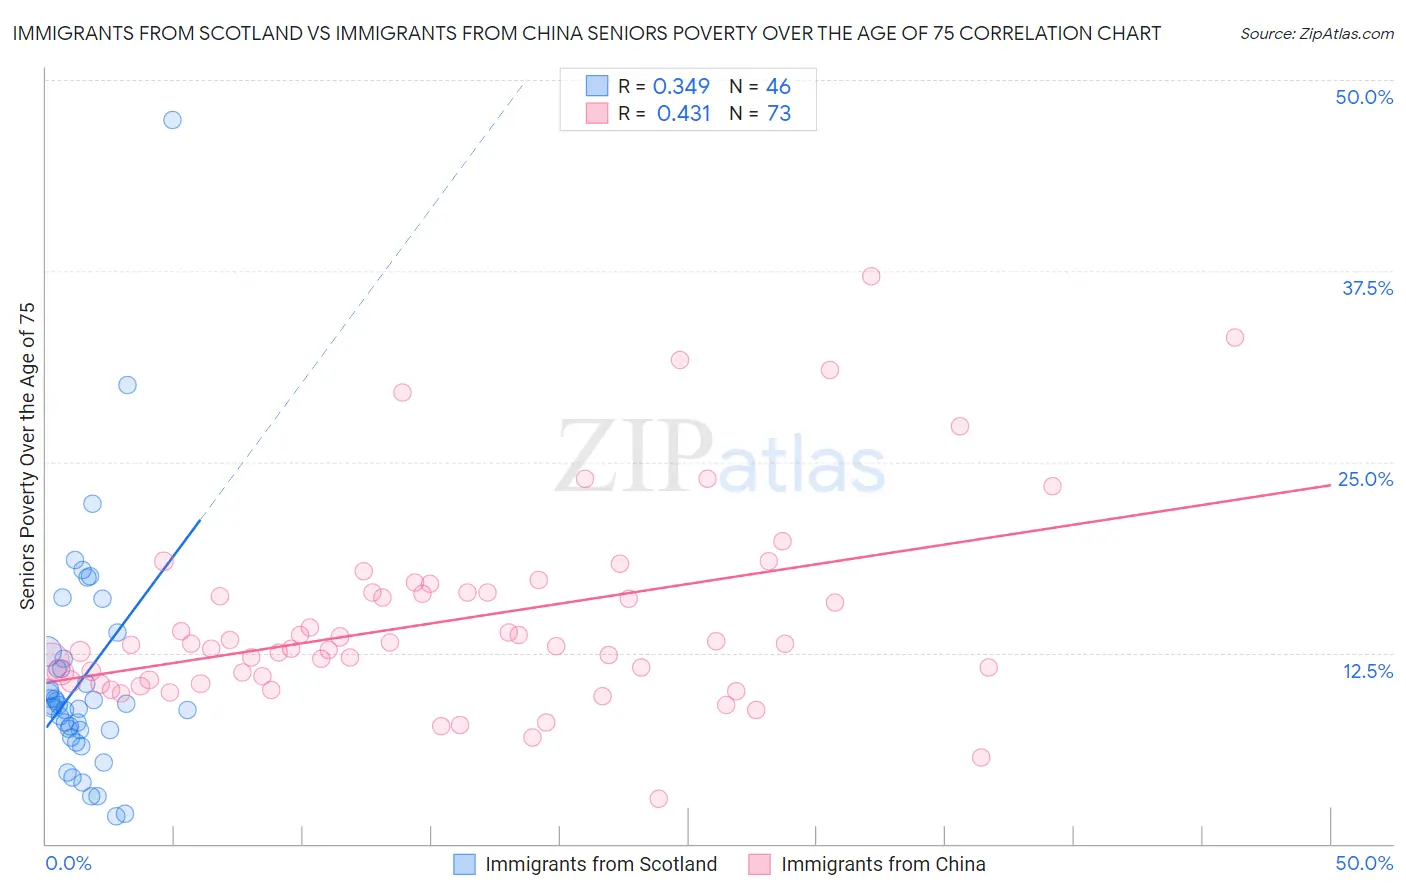 Immigrants from Scotland vs Immigrants from China Seniors Poverty Over the Age of 75